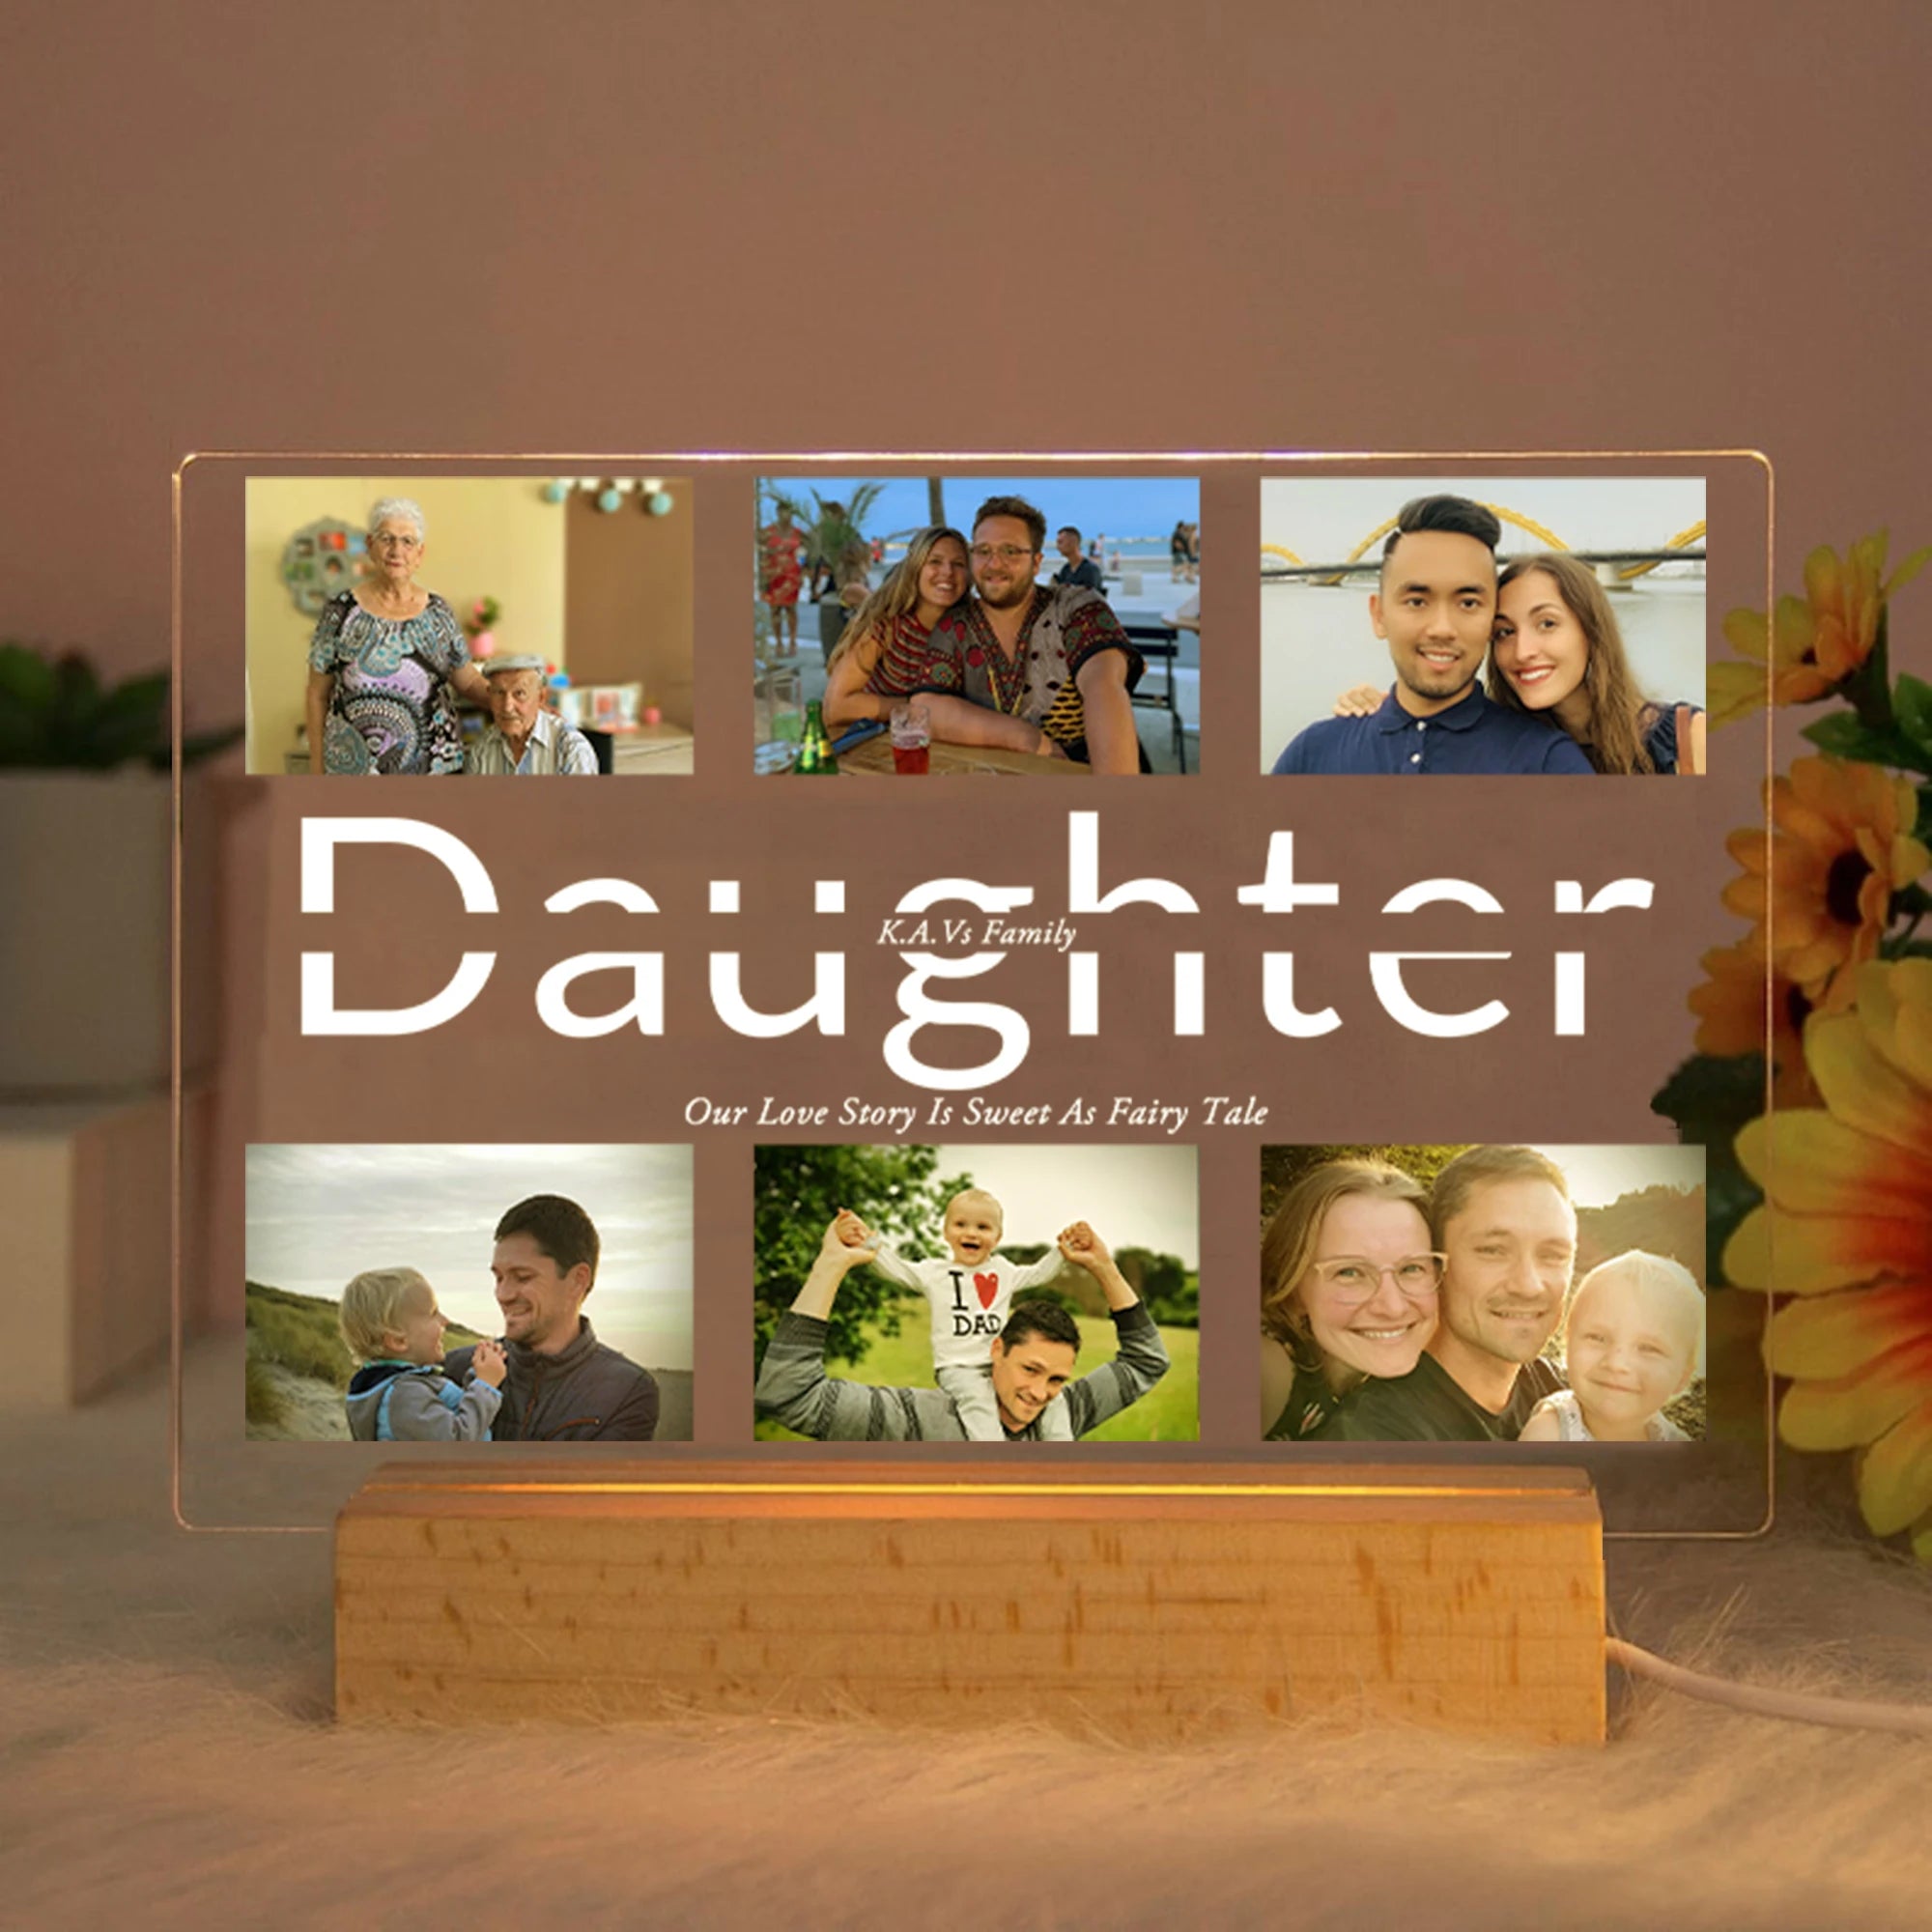 Personalized Custom Photo Text 3D Acrylic Lamp - Customized Bedroom Night Light for MOM DAD LOVE Family Day Christmas Birthday Gift Warm Light / Daughter